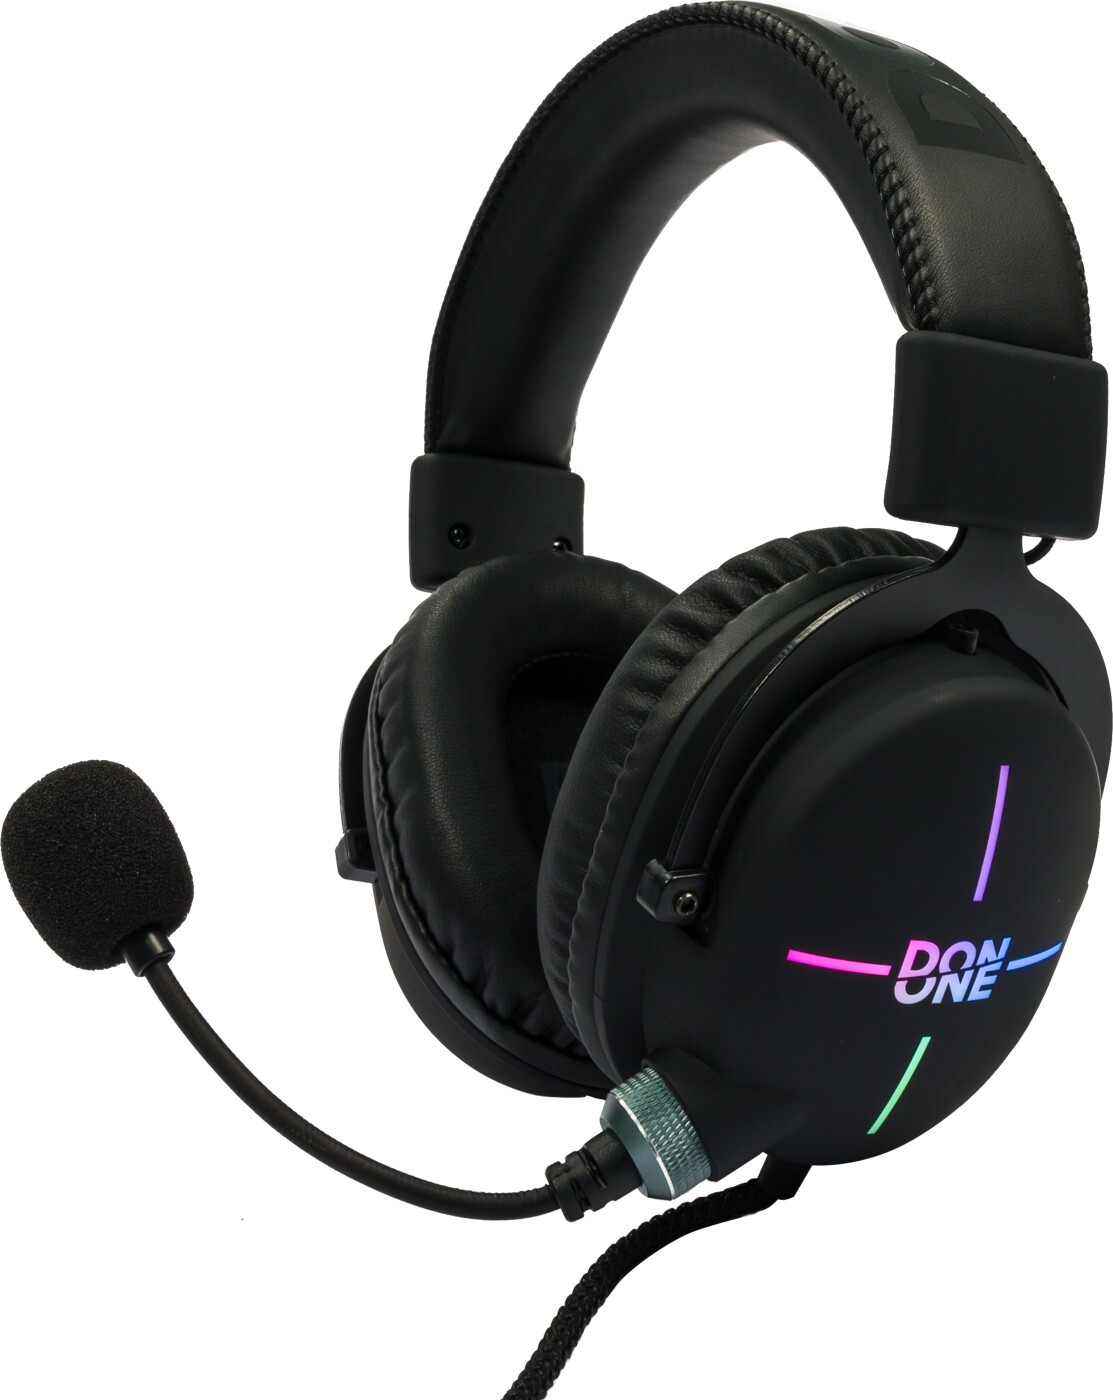 DON ONE Don One Gh300 - Gaming Headset Til Pc Mac Ps4 Sort